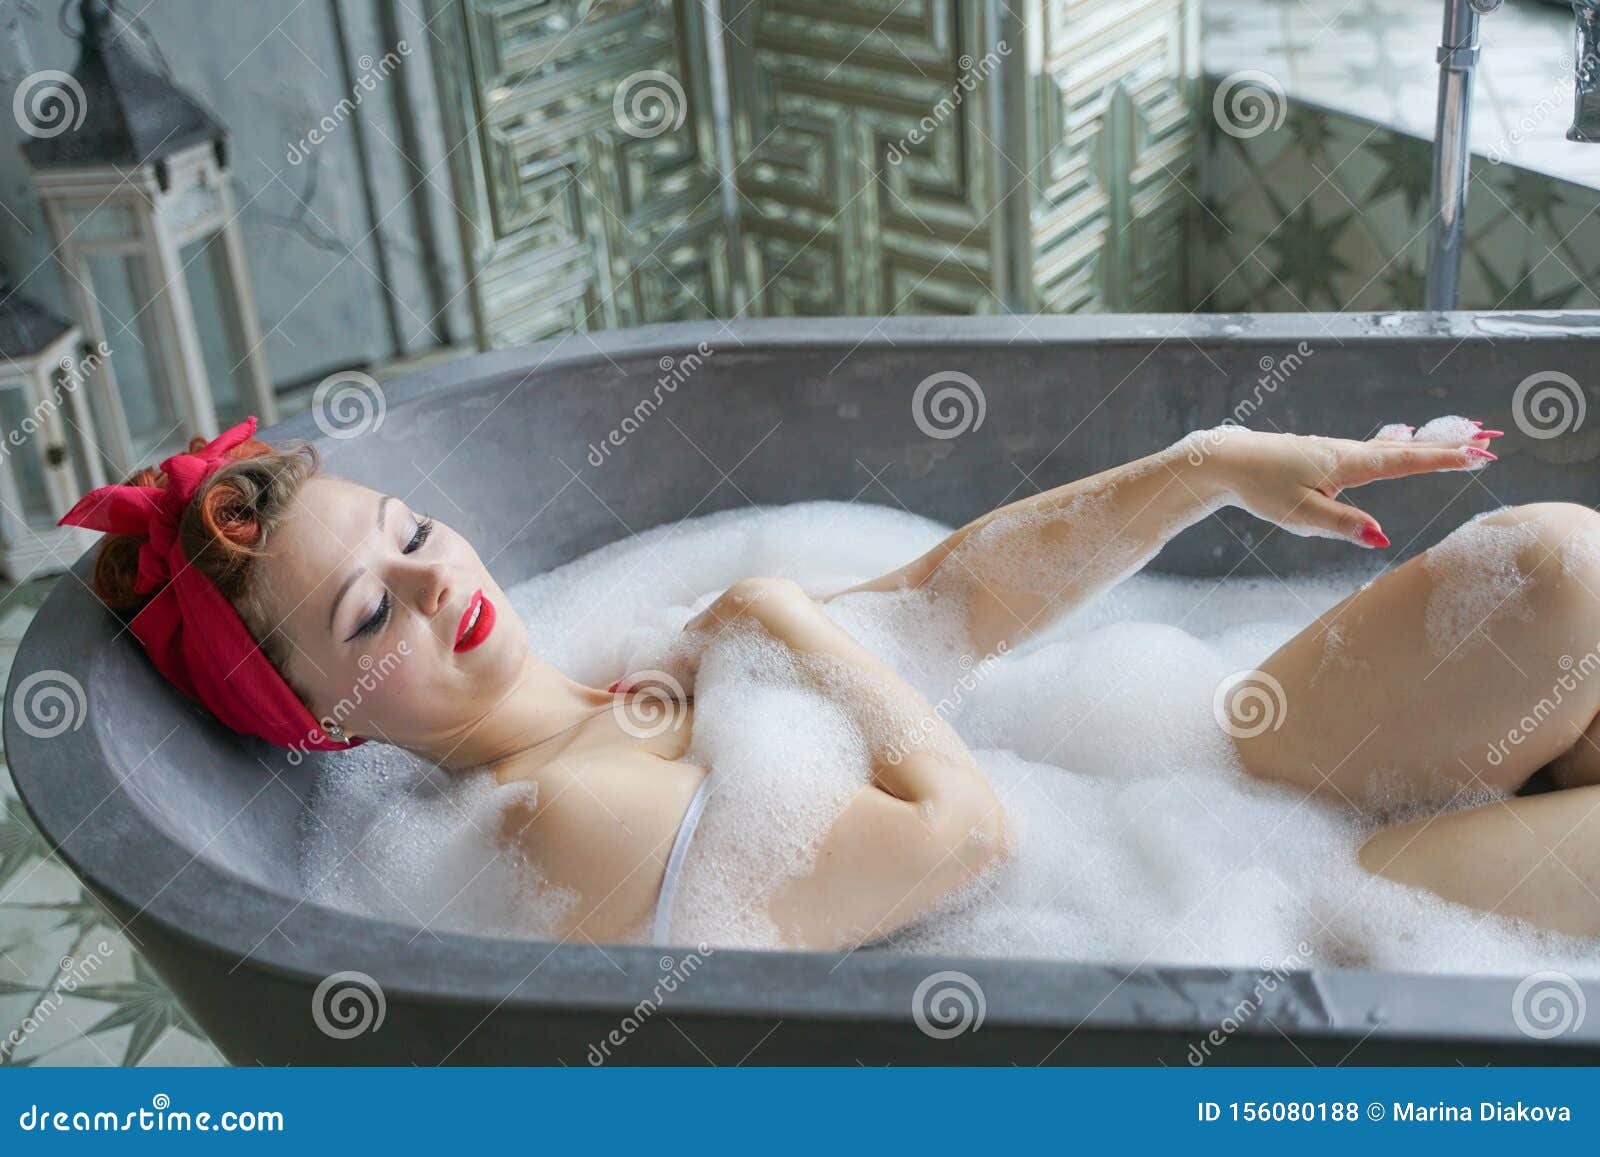 dayangku intan recommends hot girls in bathing pic